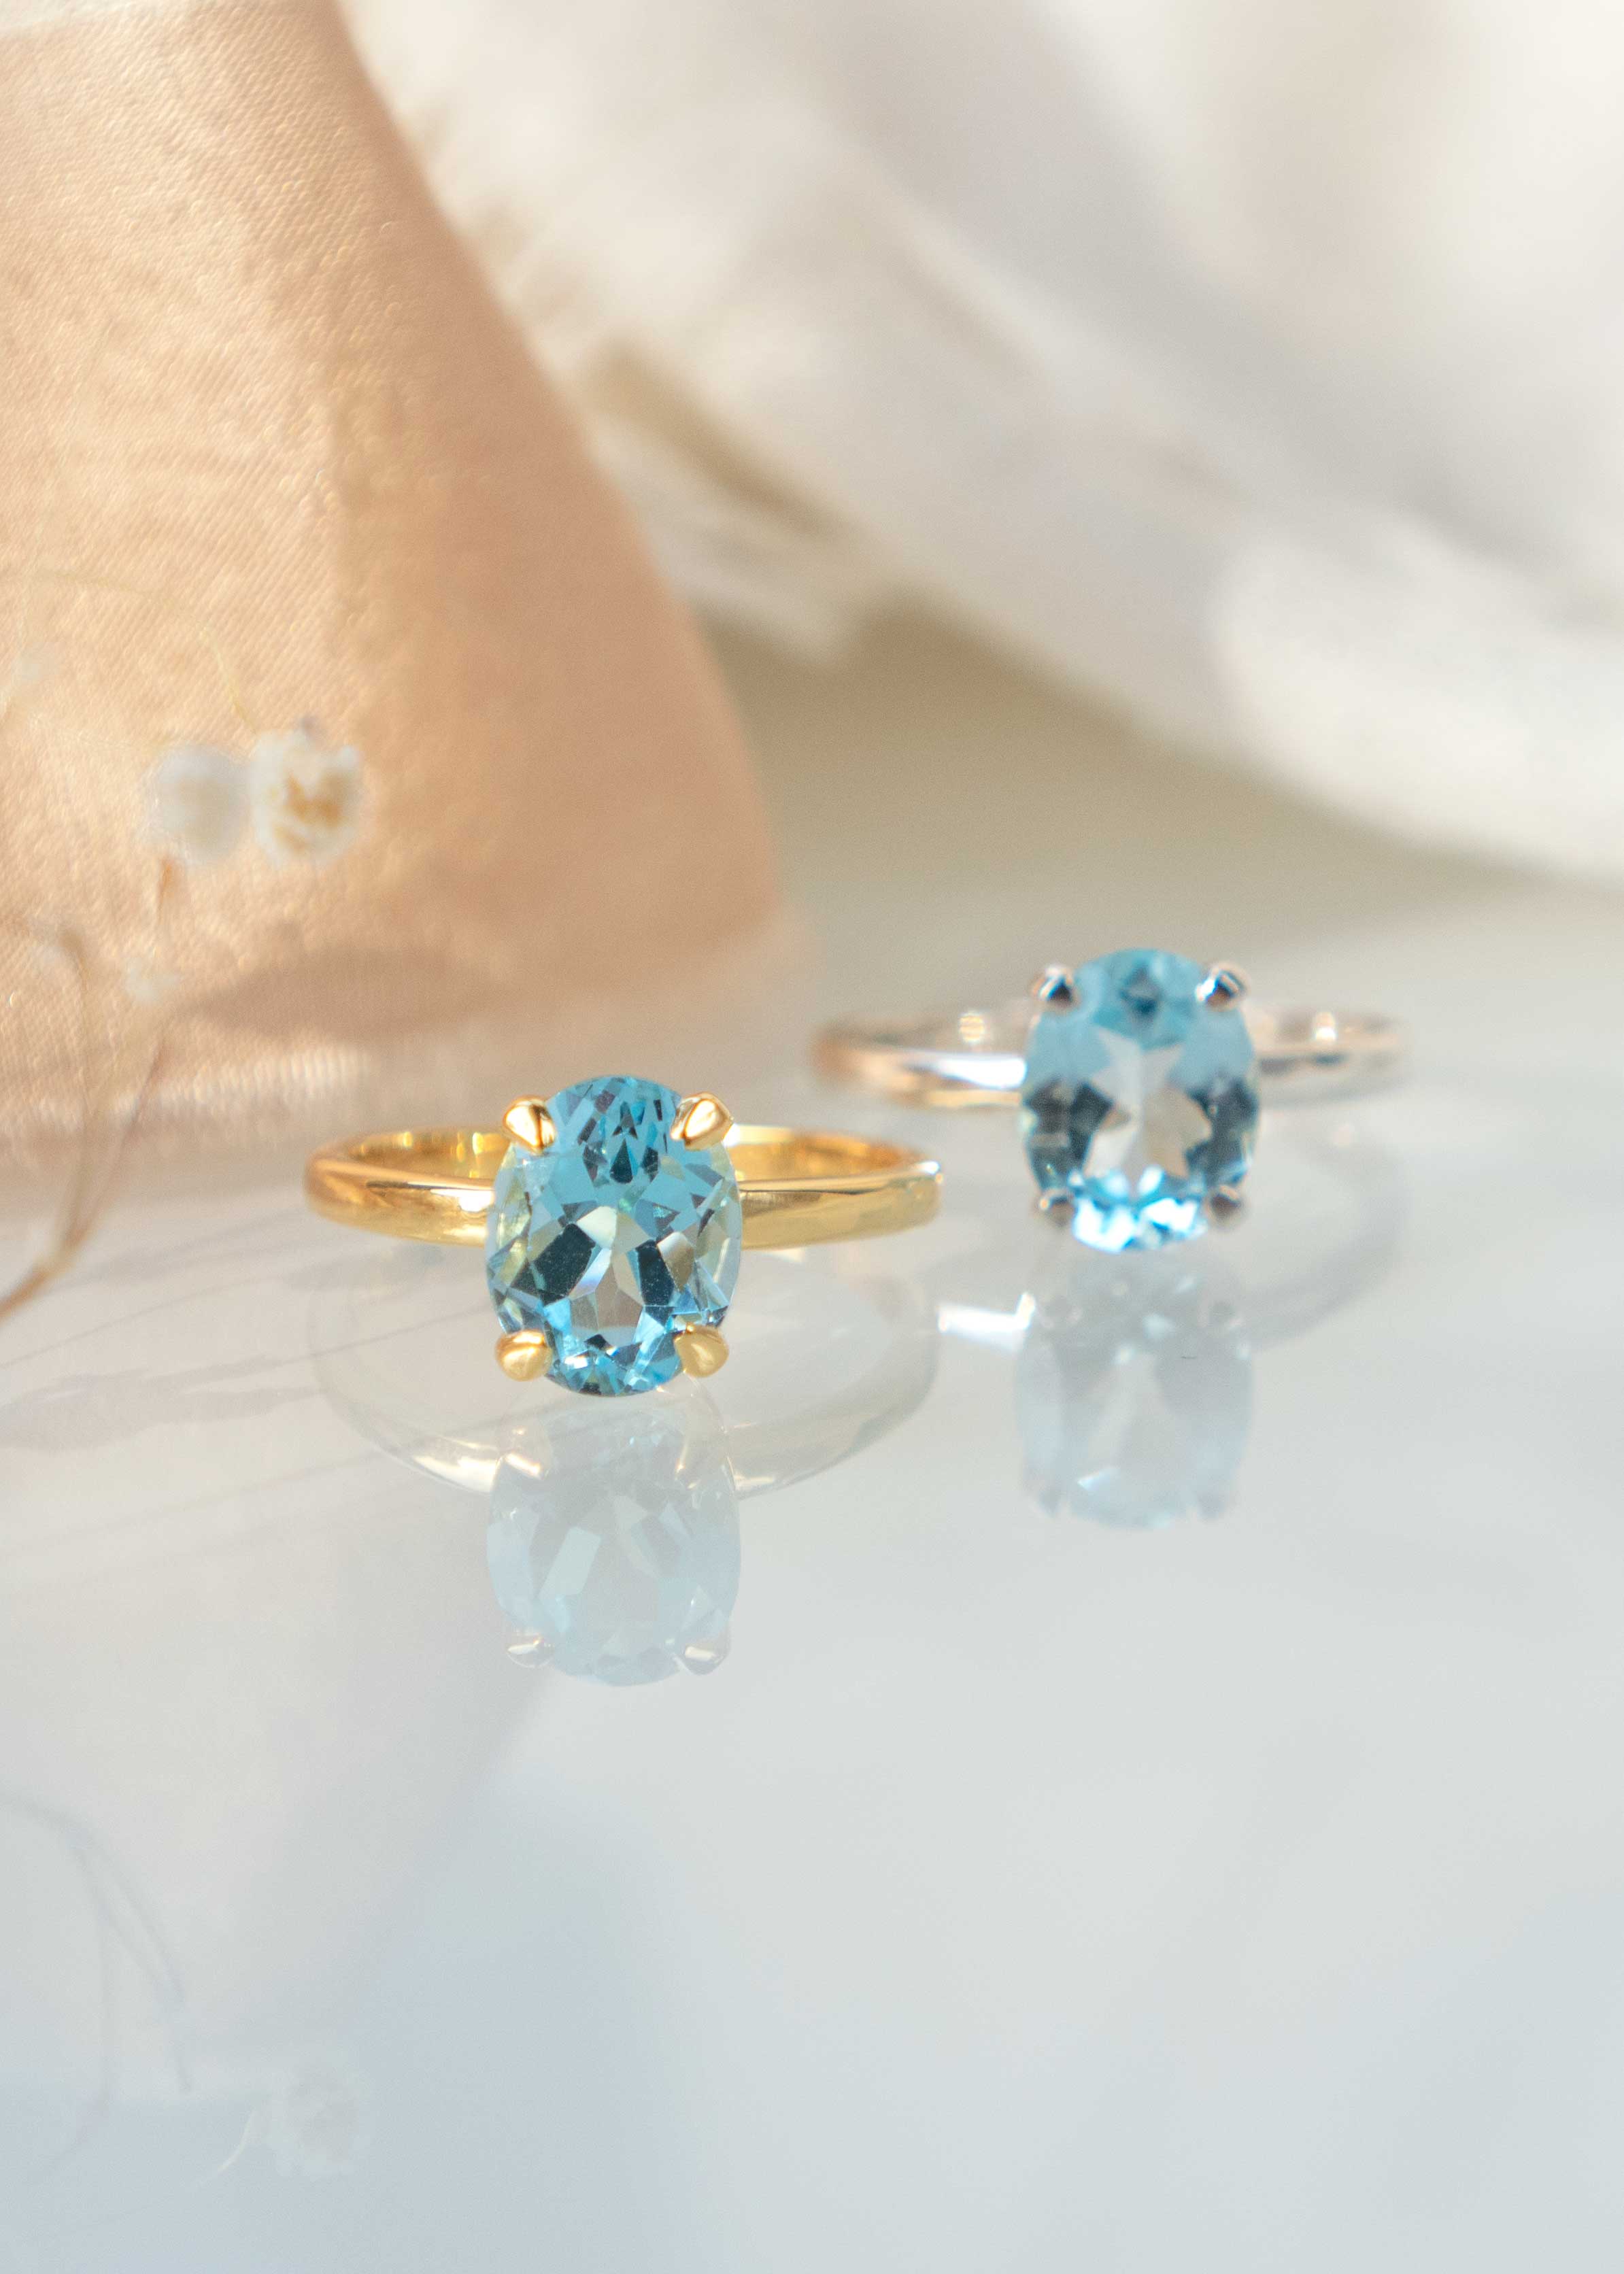 Genuine Blue Topaz Engagement Promise Proposal Ring Gold Gifts for Women December Birthstone